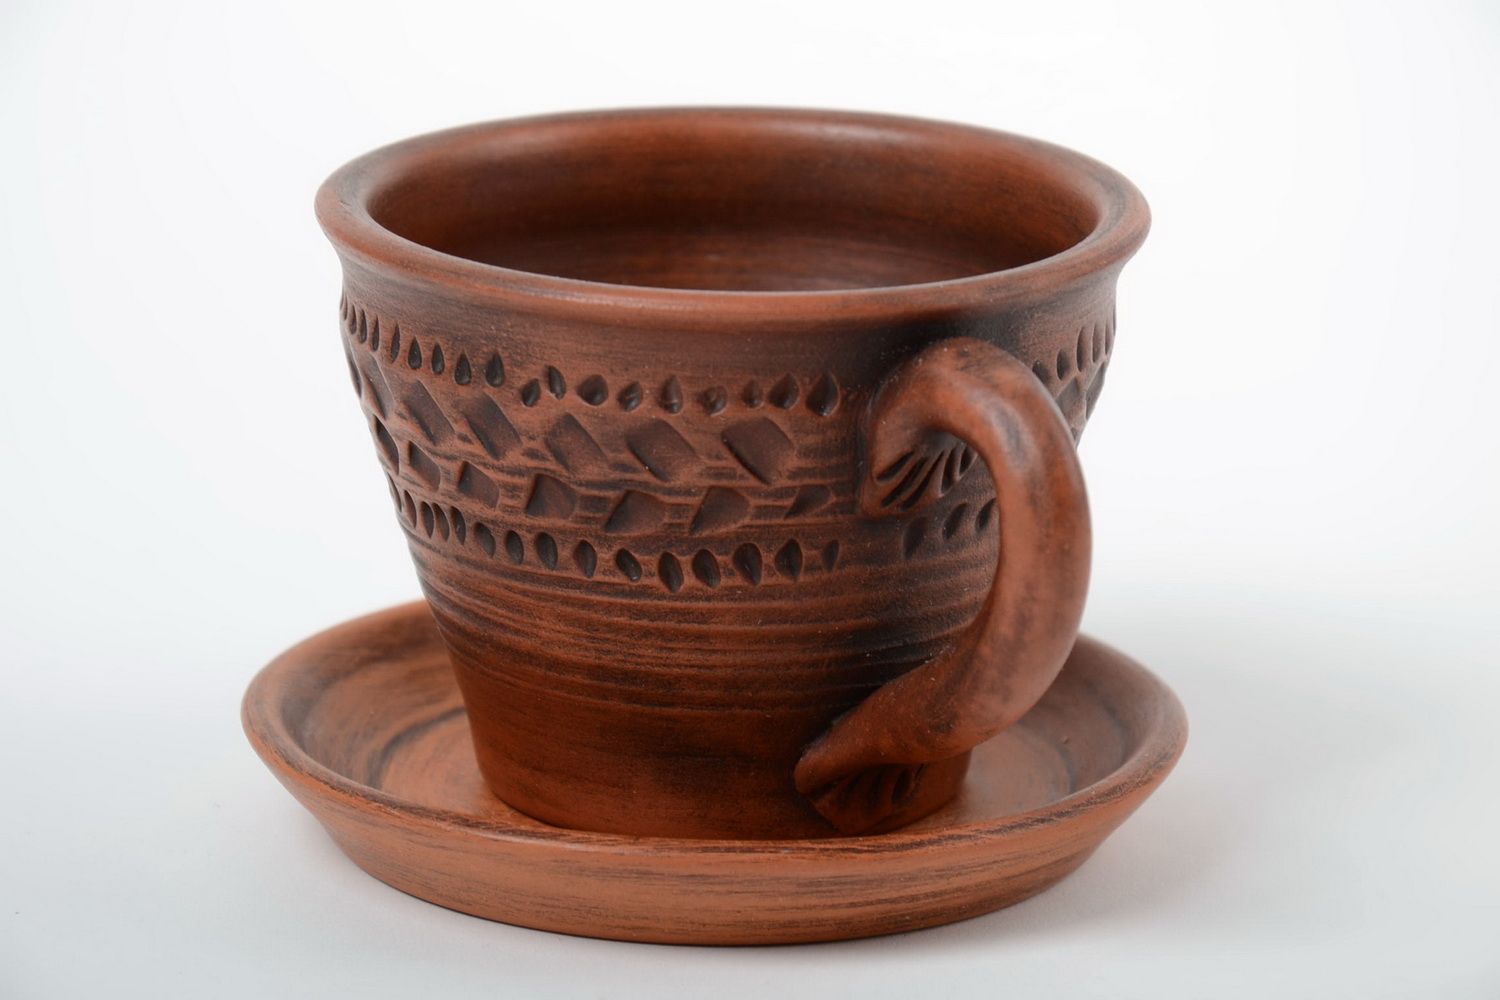 10 oz ceramic cup for coffee with saucer and handle in red brown color 0,82 lb photo 4